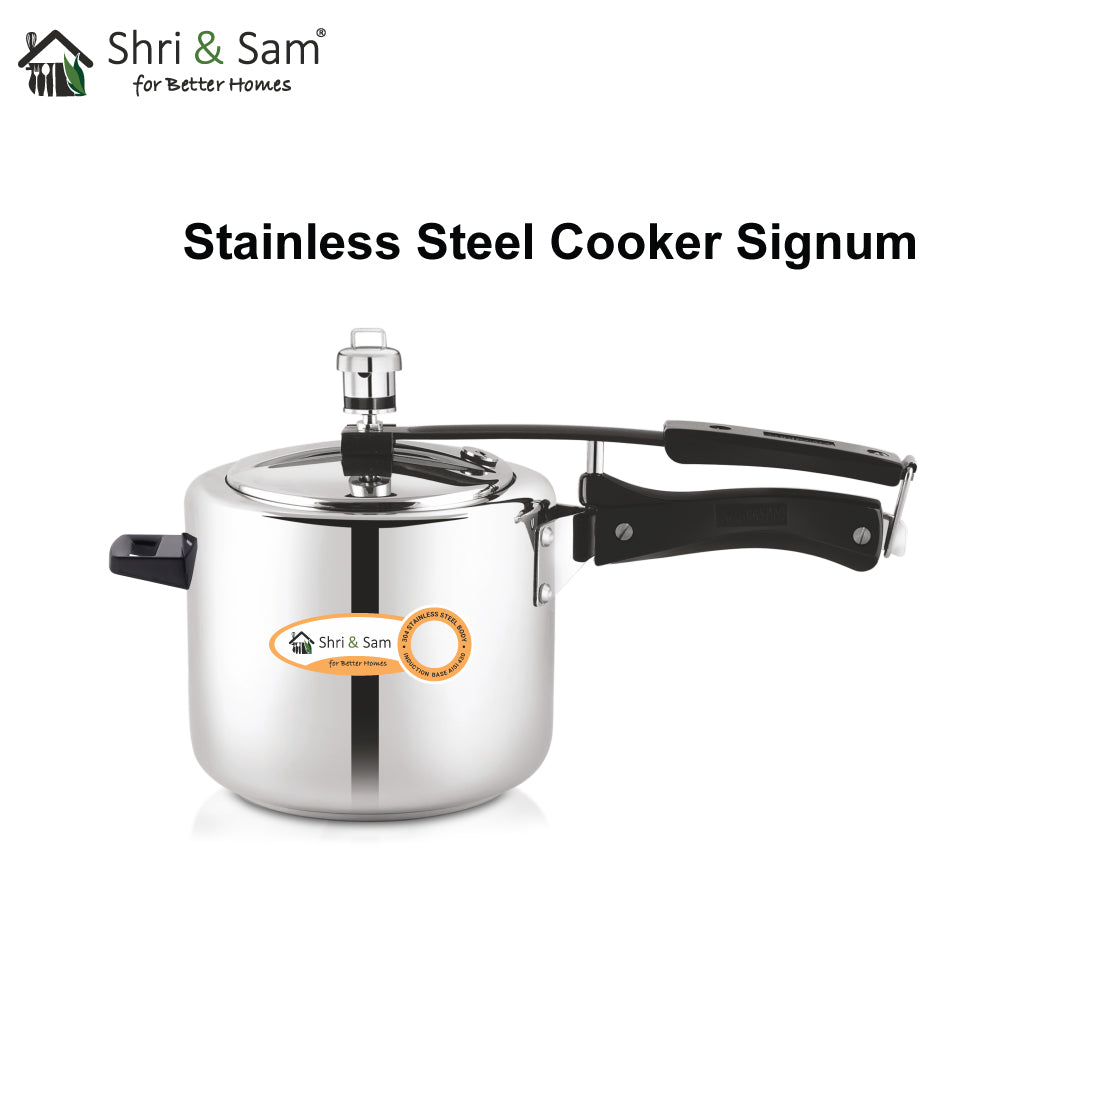 Stainless Steel Cooker Signum